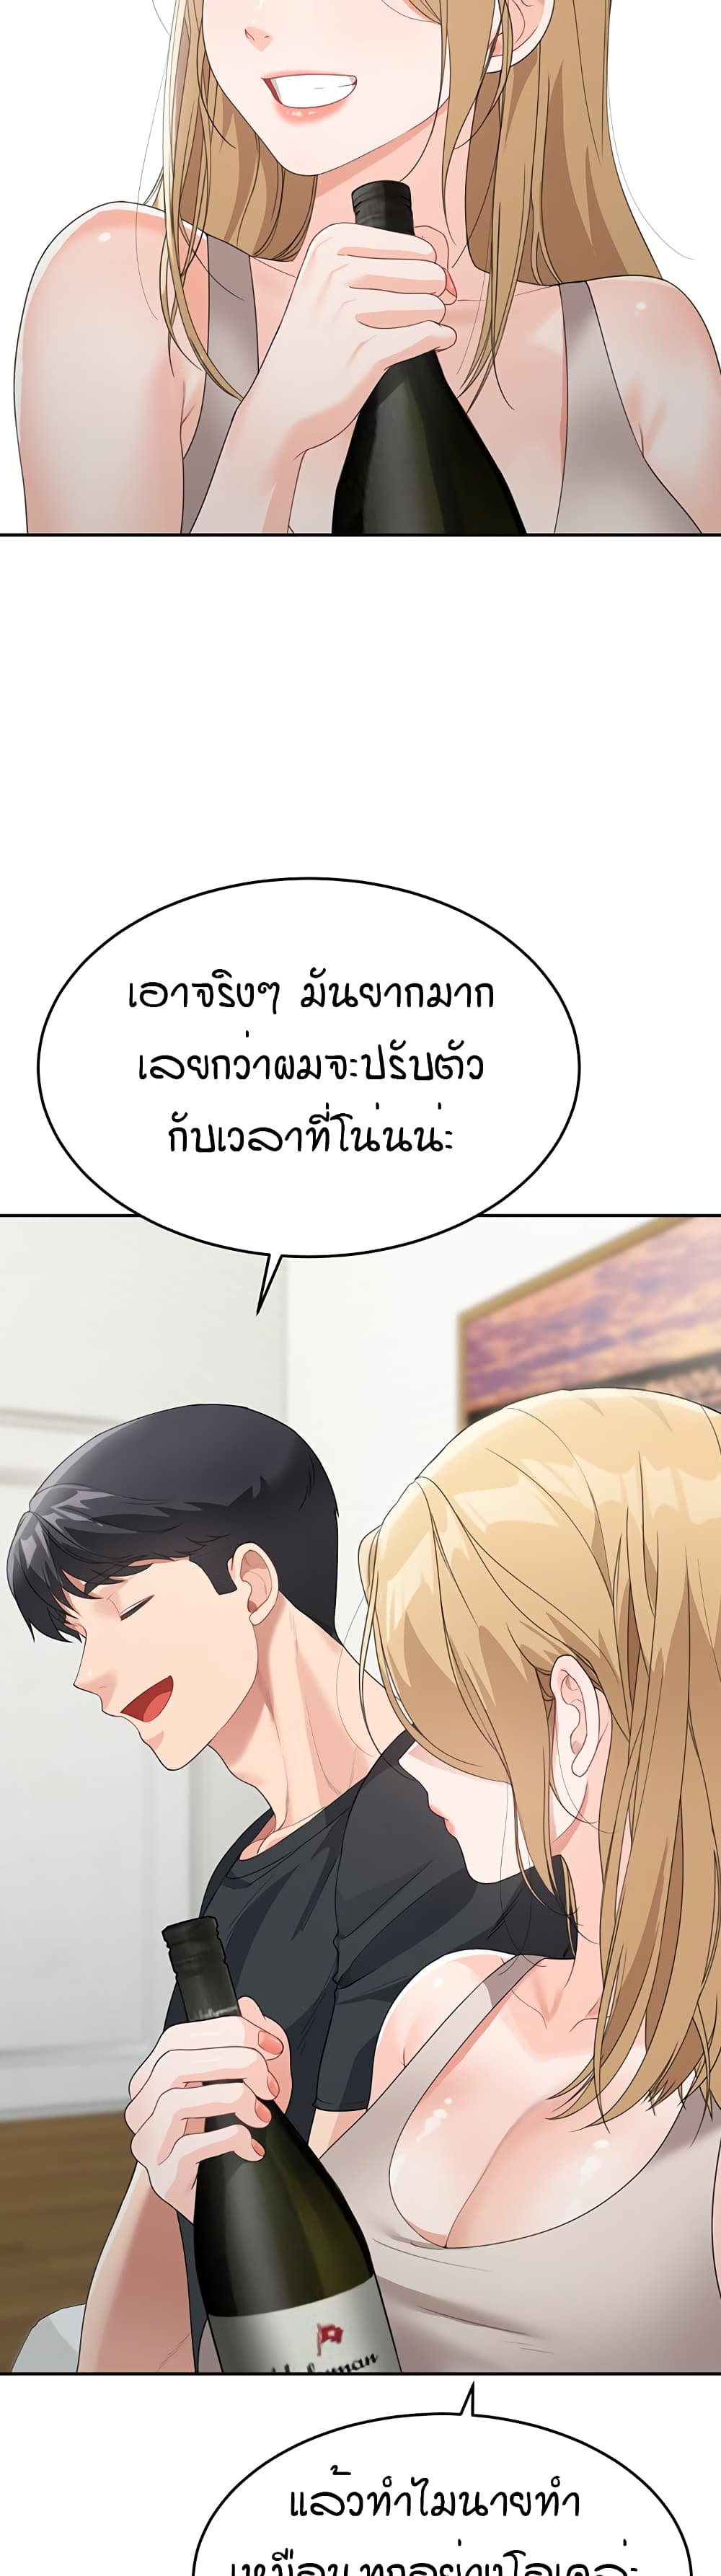 Is It Your Mother or Sister? ตอนที่ 6 ภาพ 35